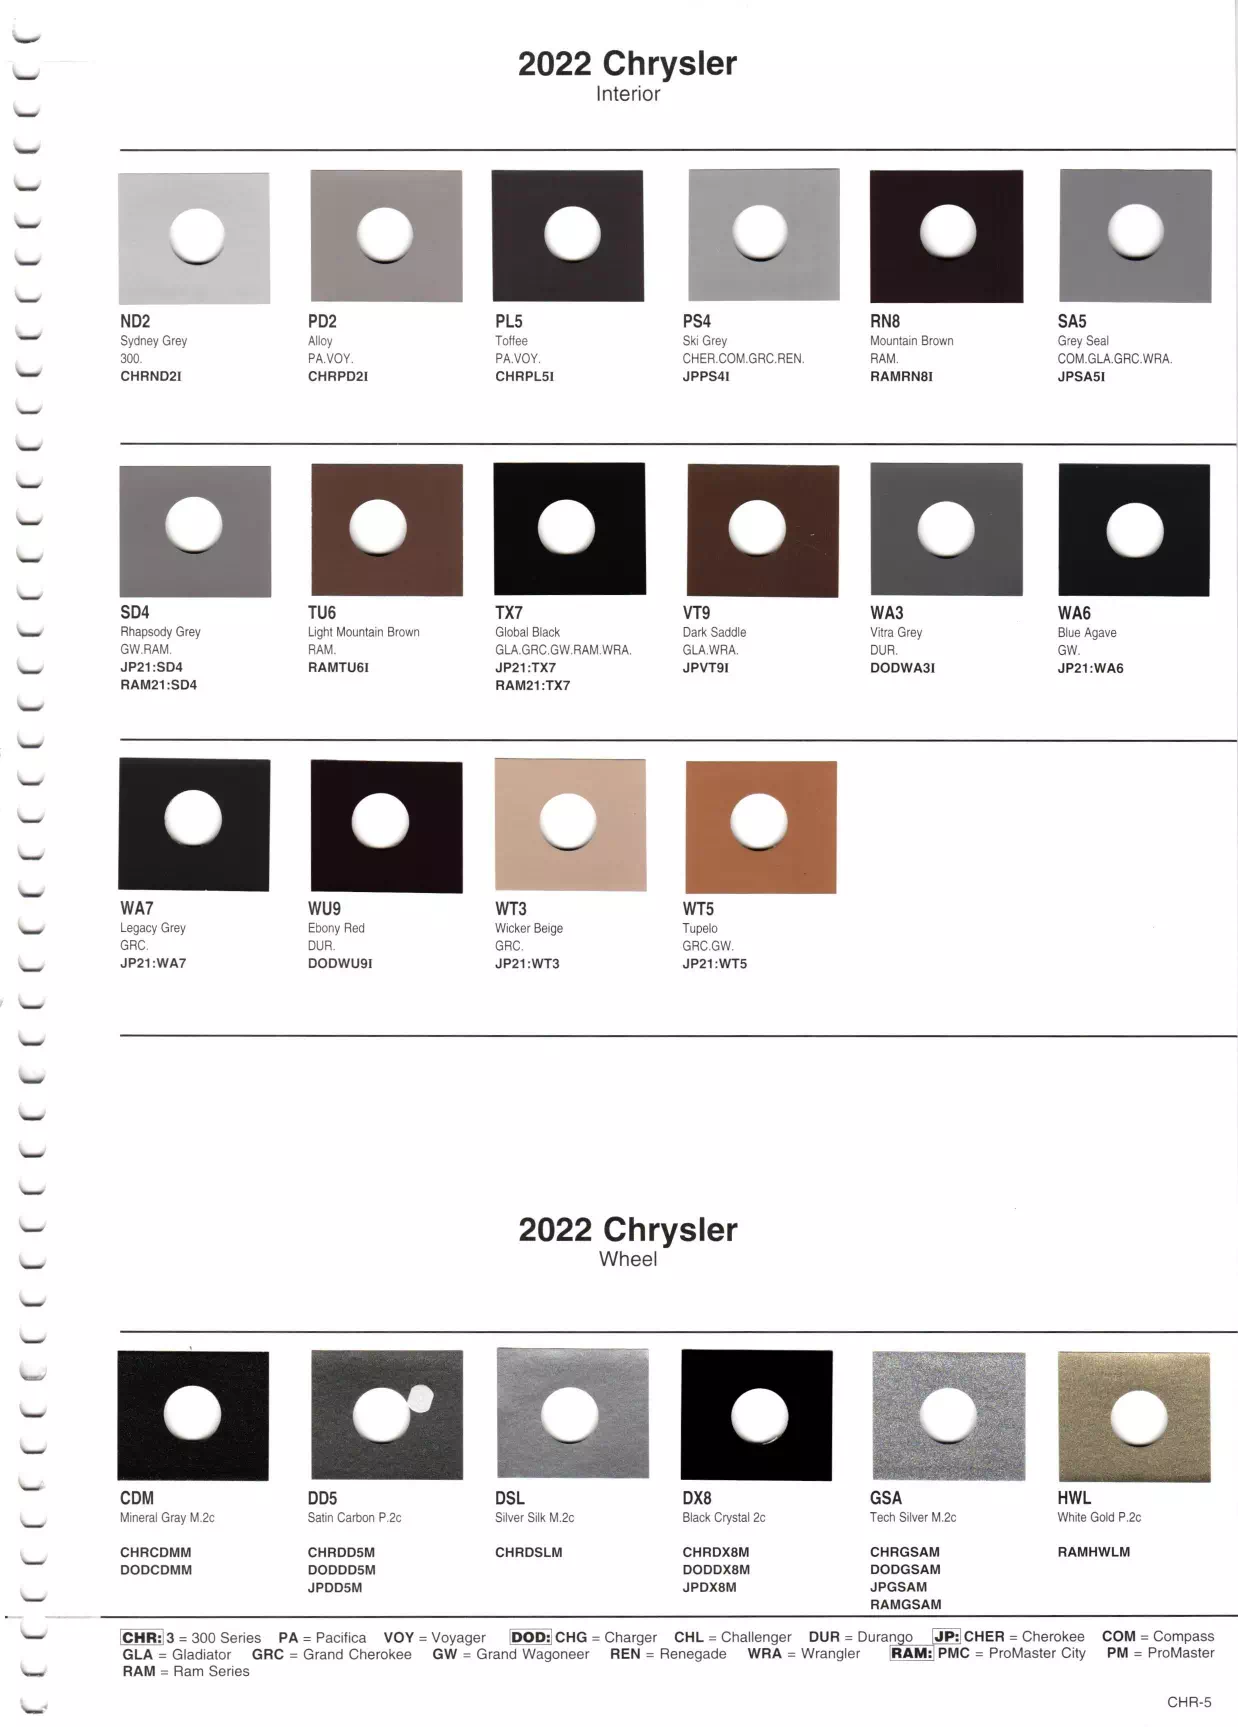 For the 2022 year color shades and examples of the exterior color of the 2022 Stellantis Brands